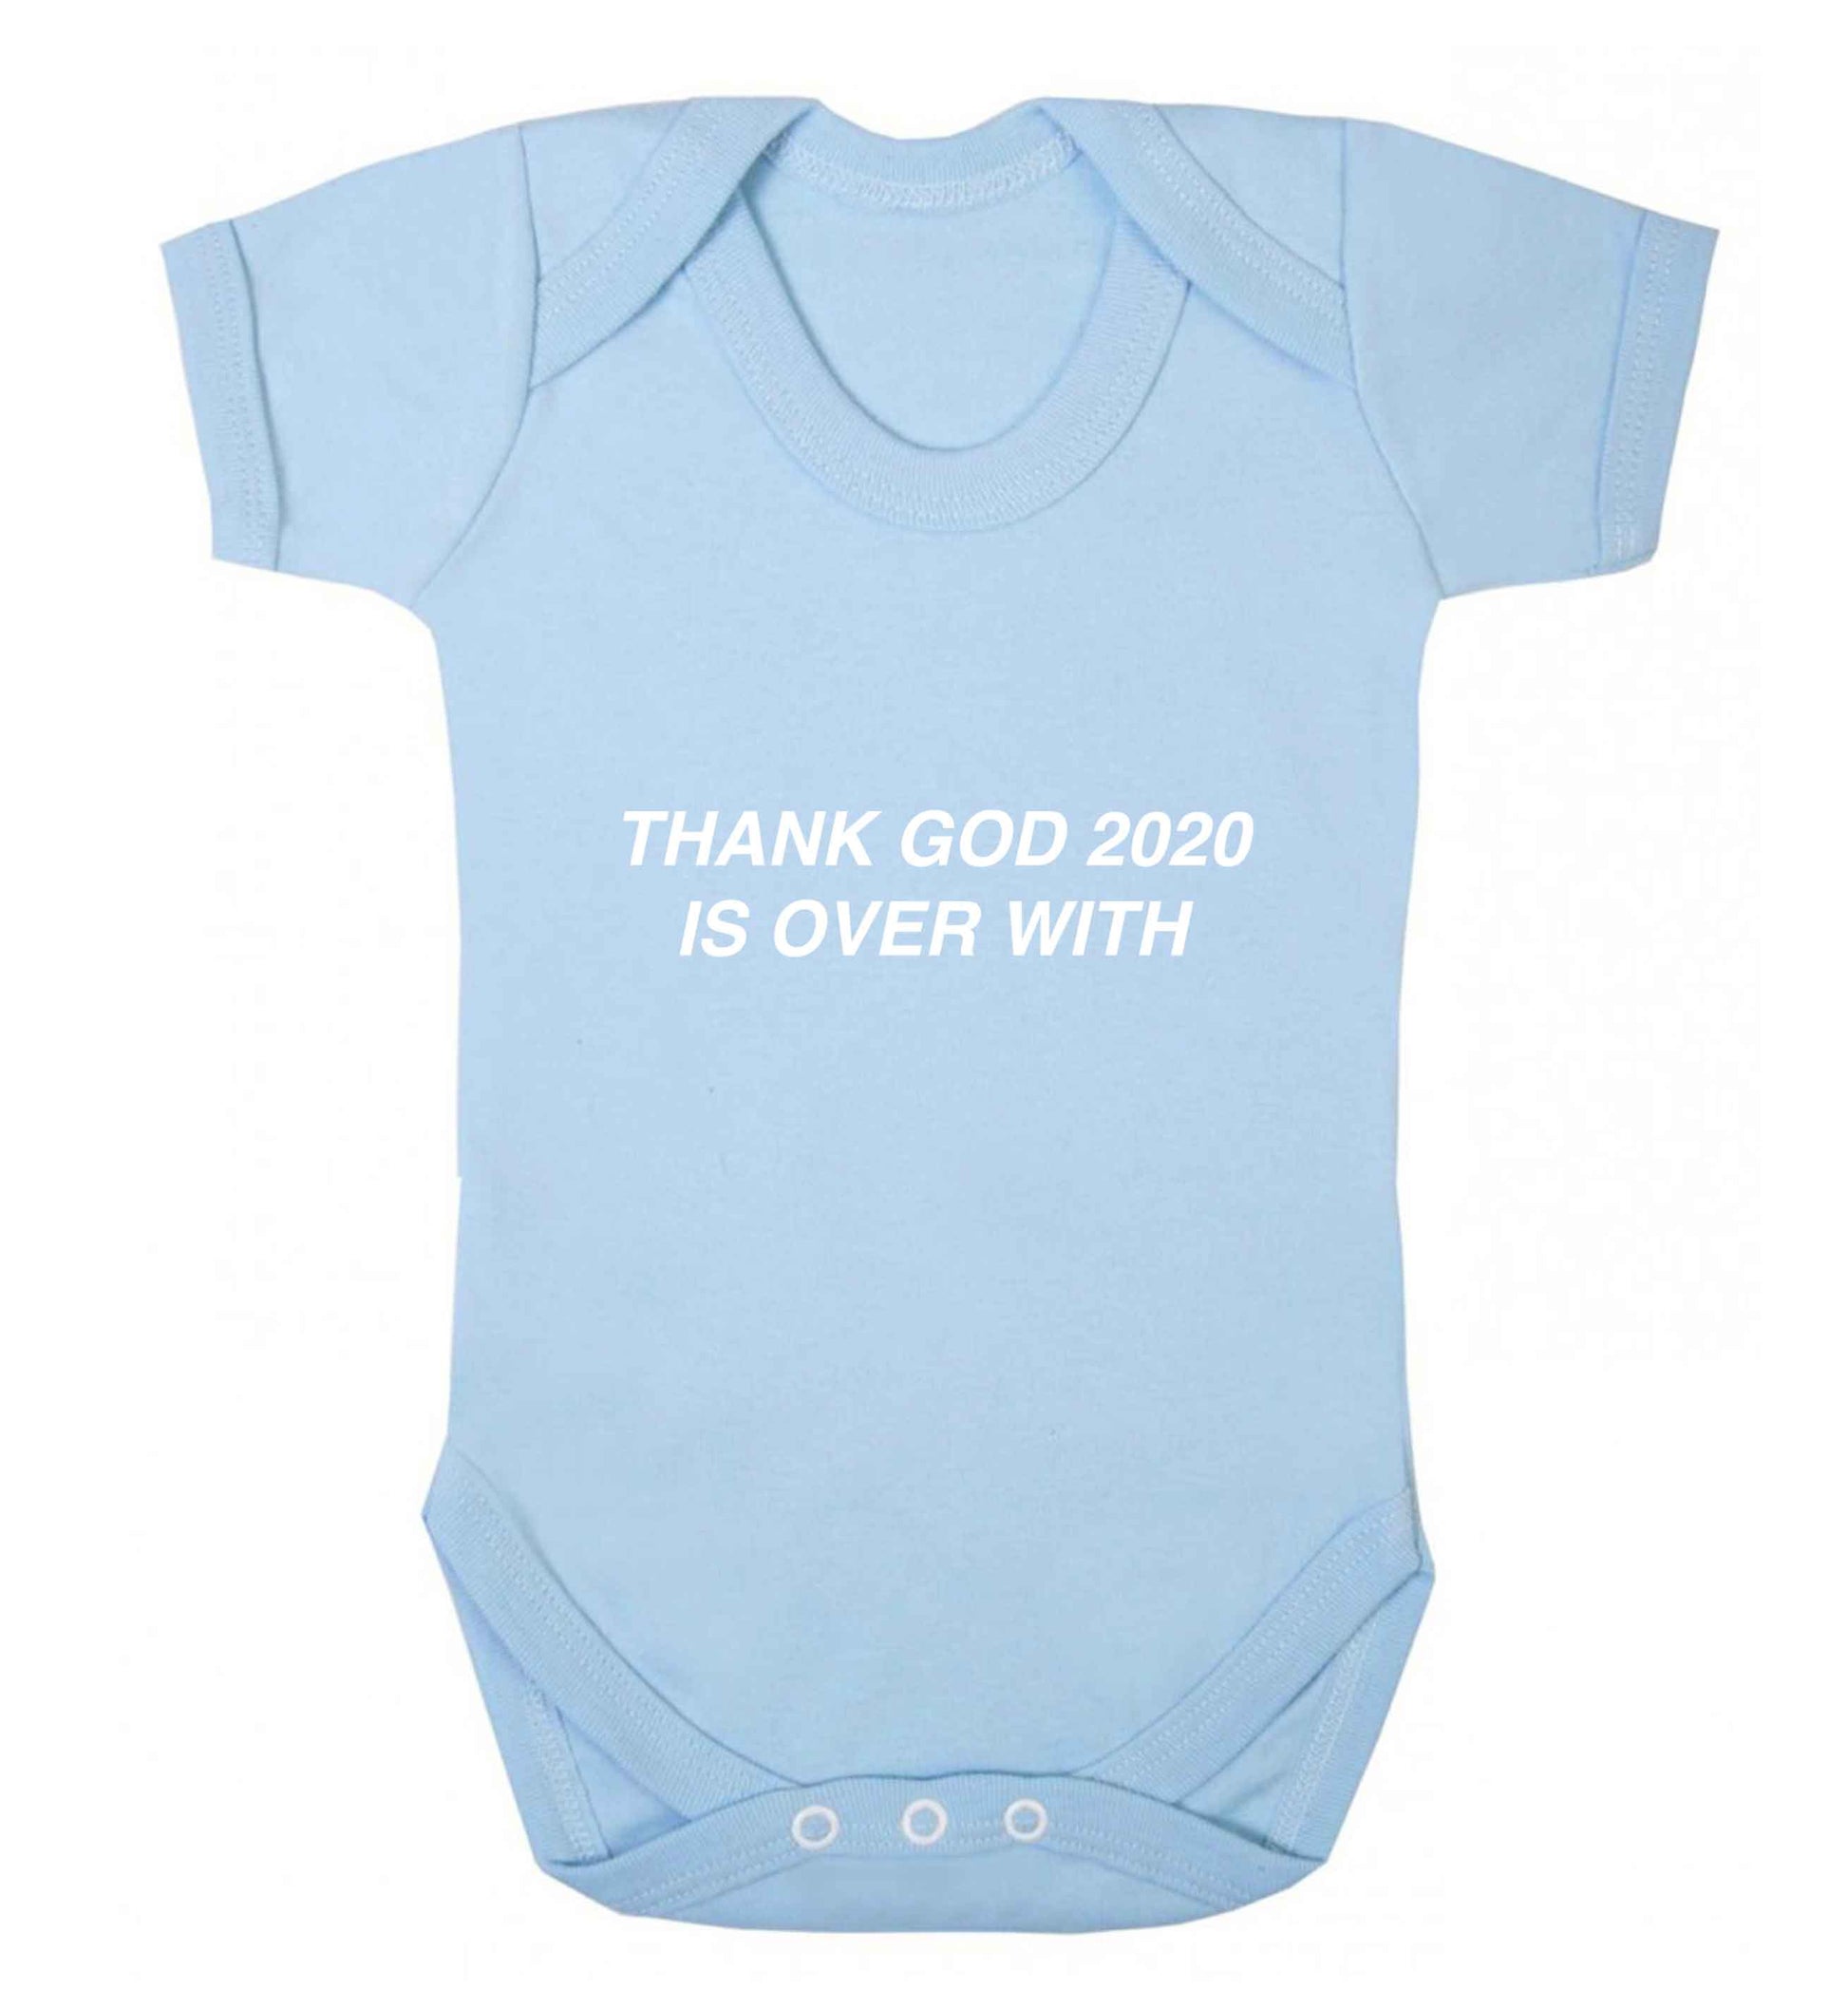 Thank god 2020 is over with baby vest pale blue 18-24 months